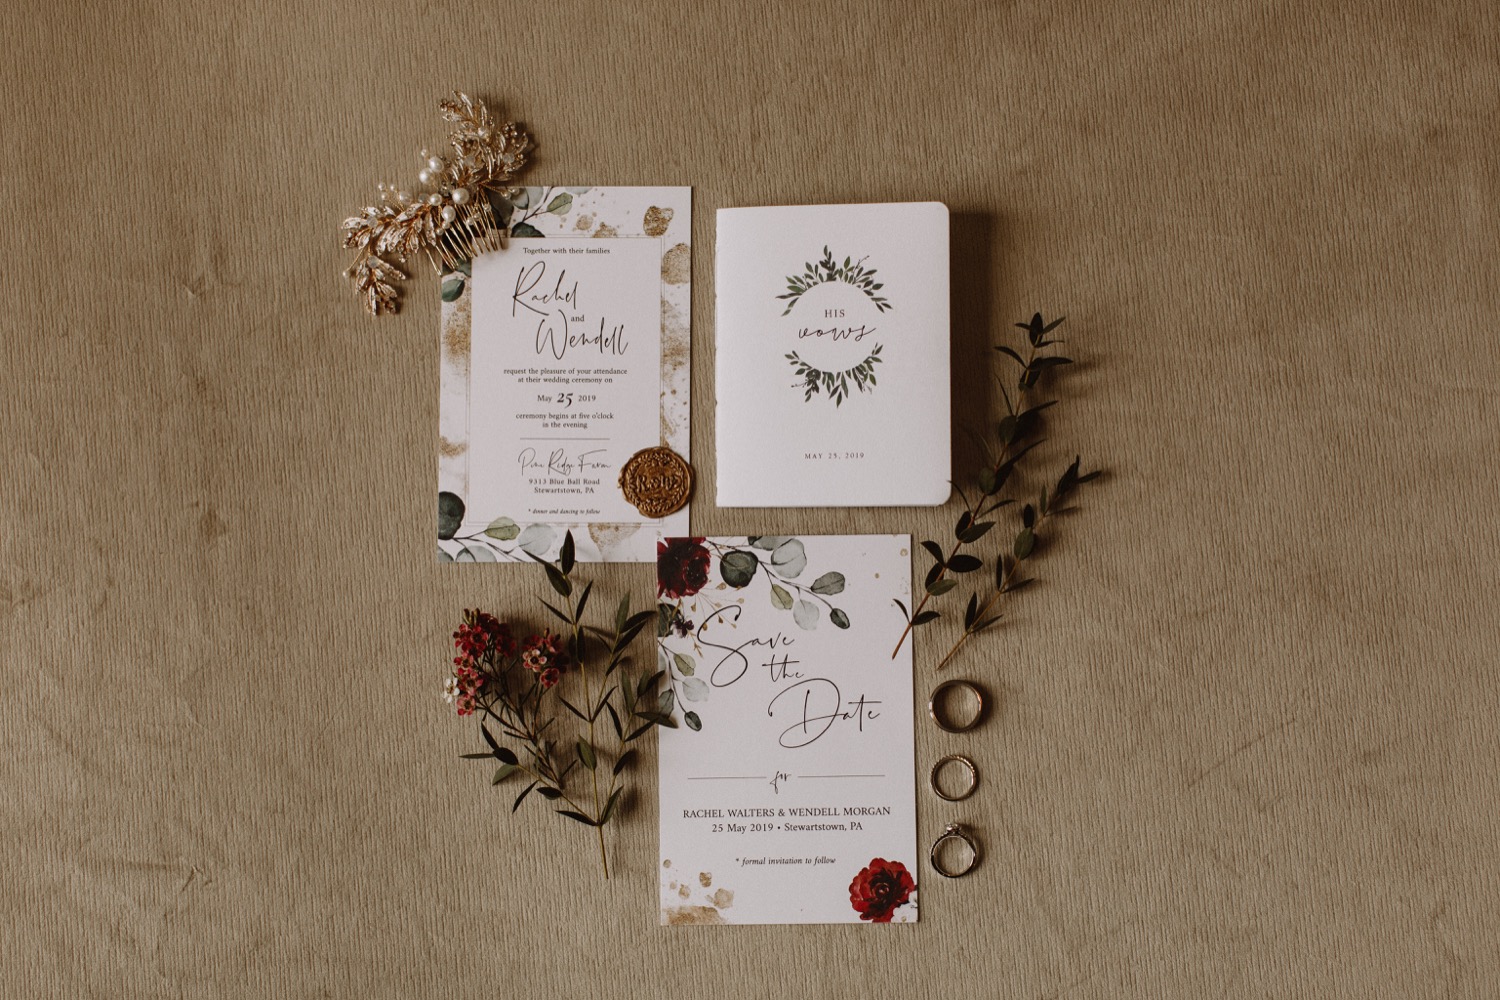 Wedding invitations with flowers